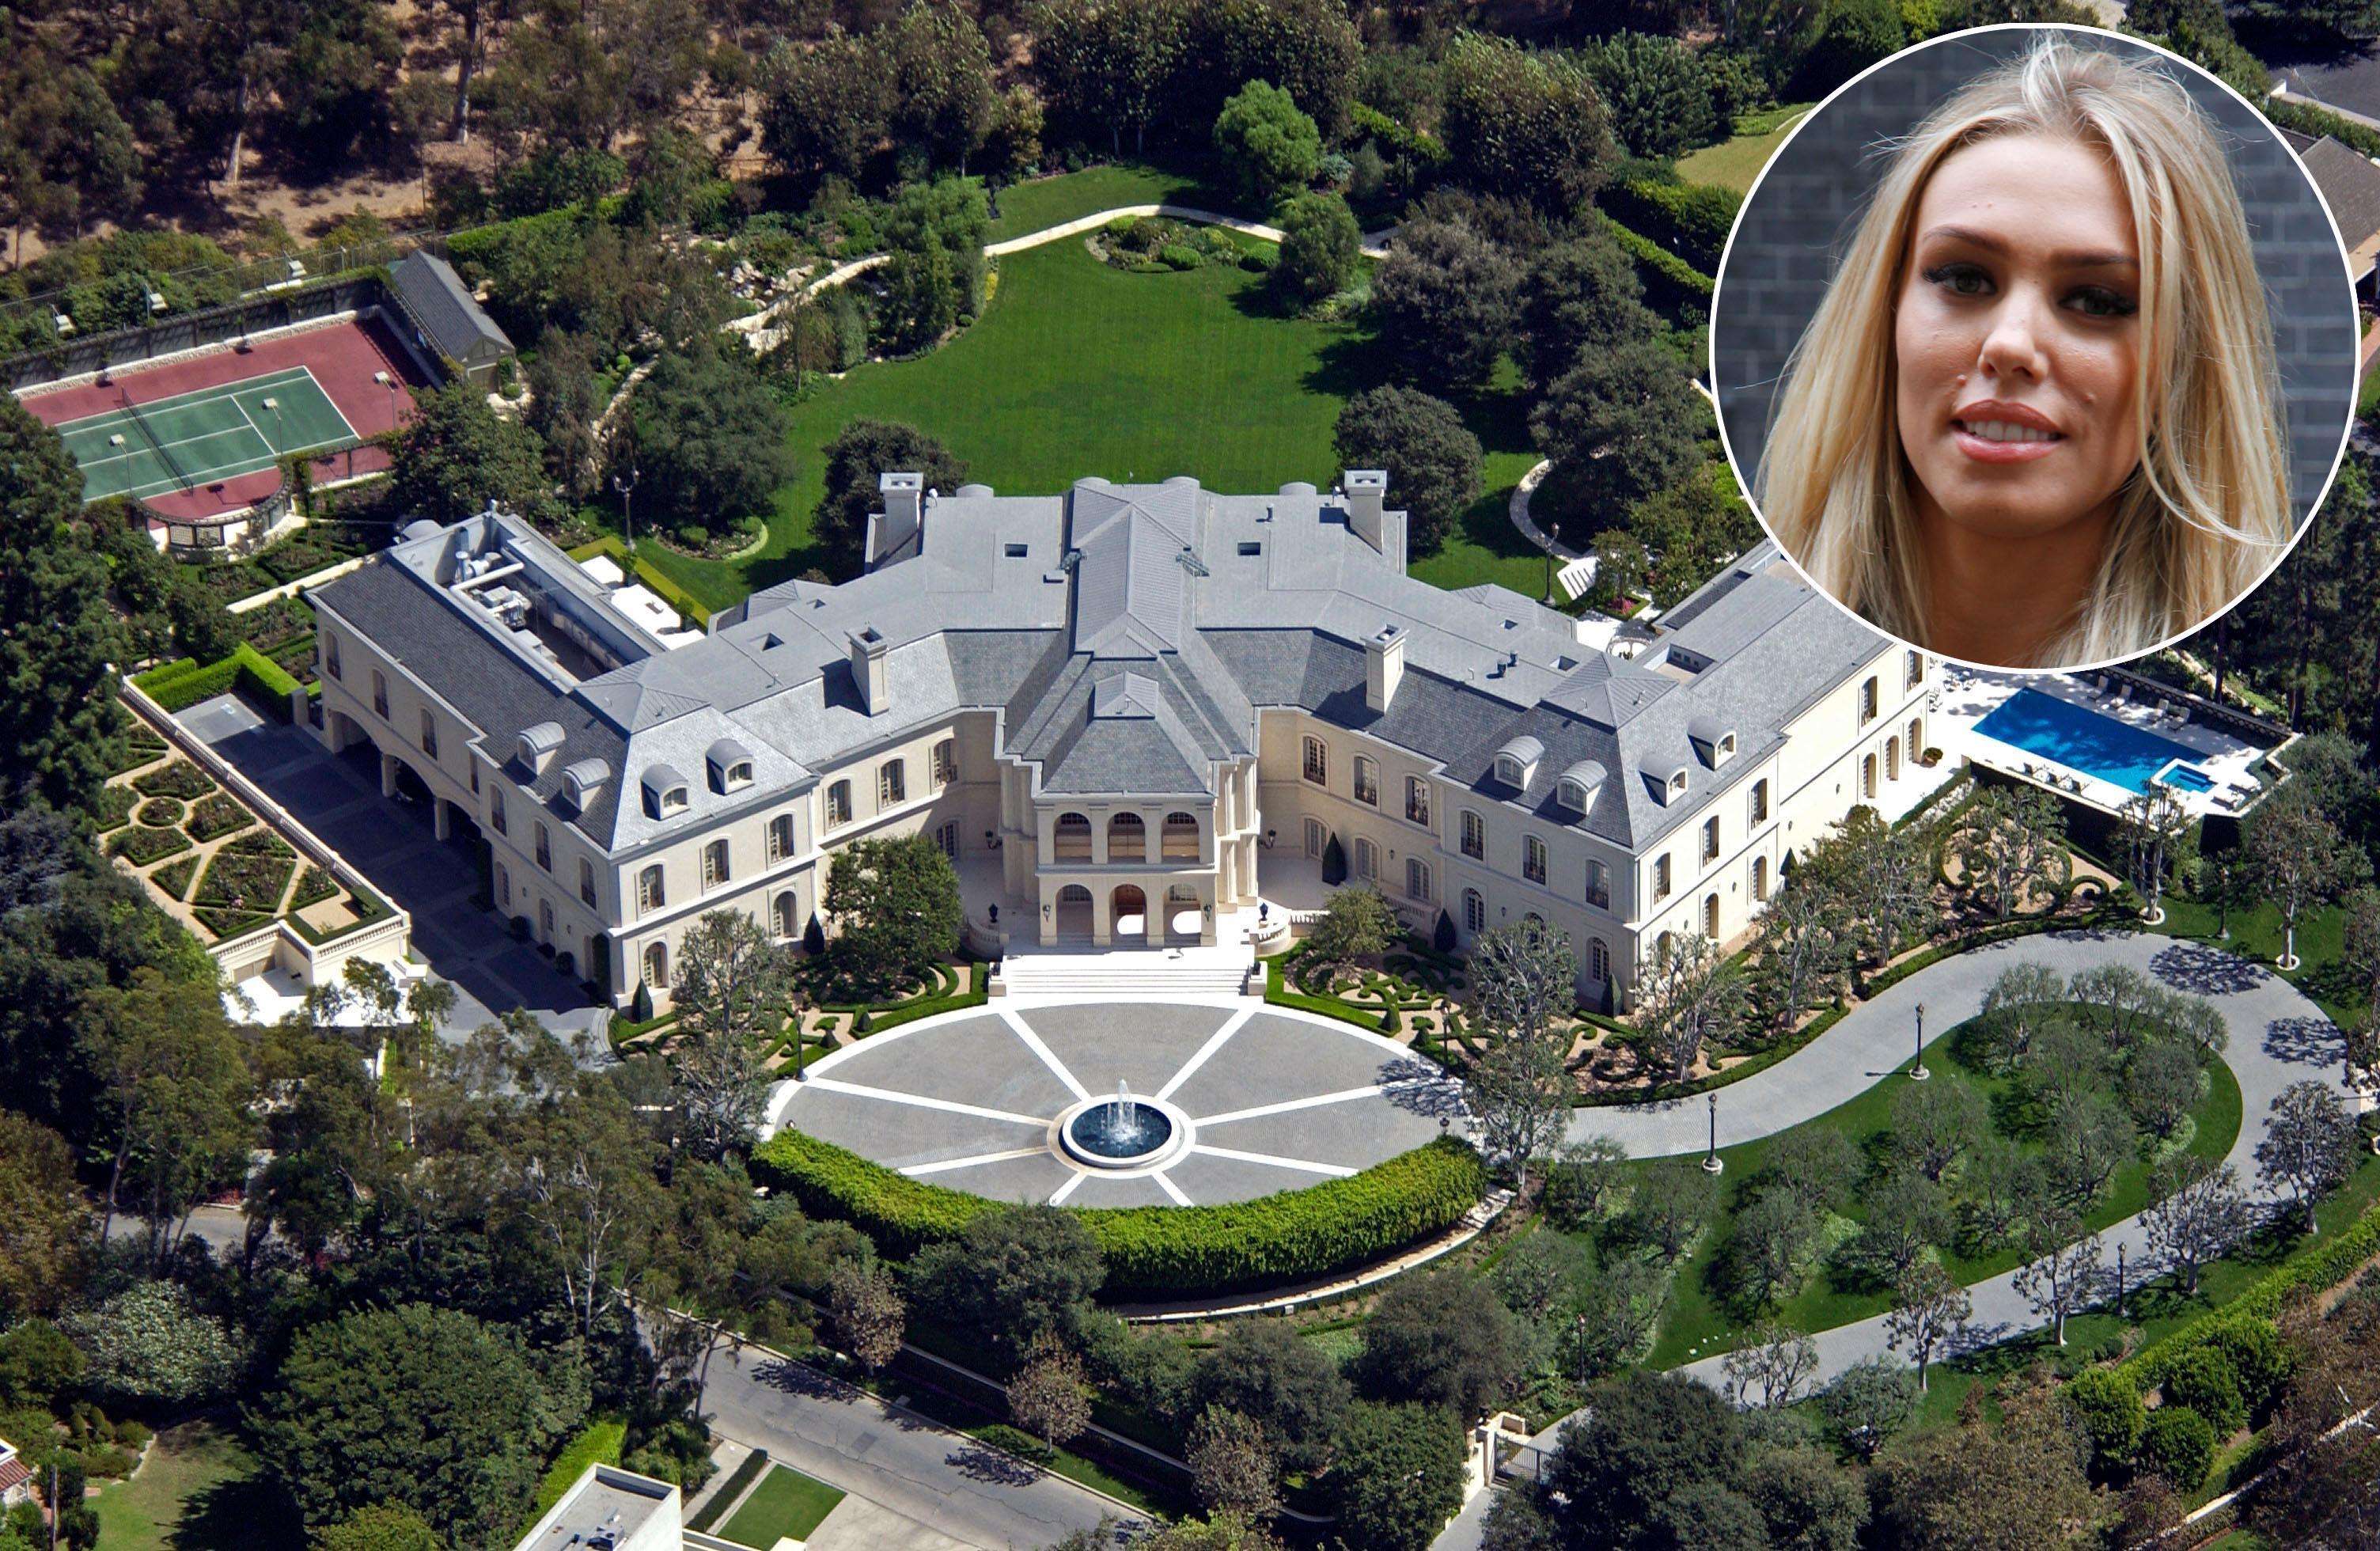 Top 10 Most Expensive Celebrity Homes In Recent History - Vrogue